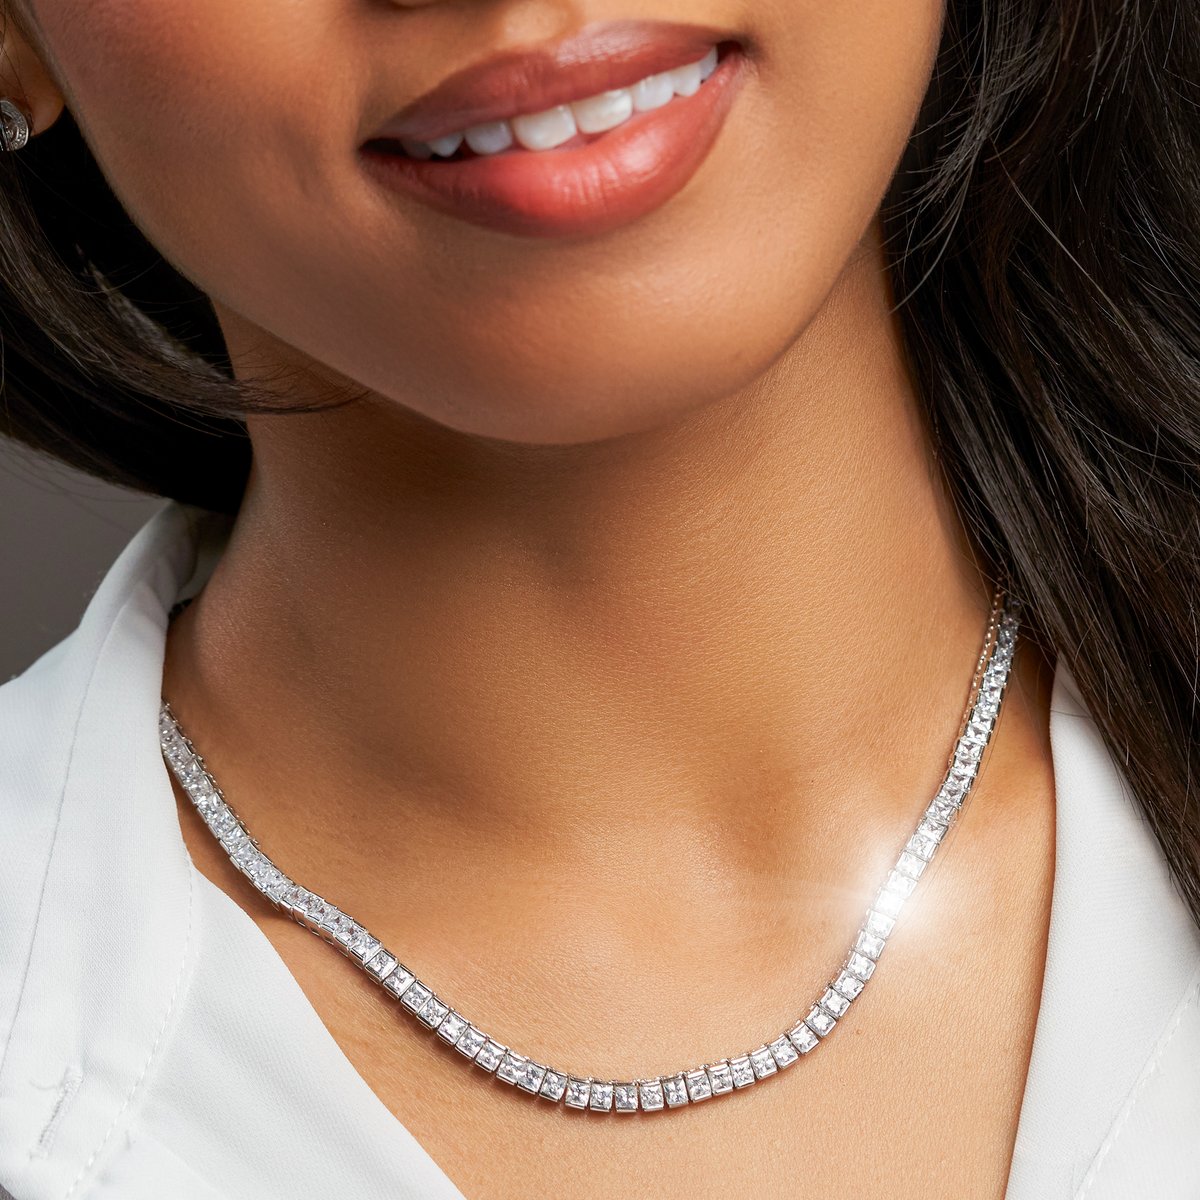 We have the most gorgeous necklace for your special events ❤💎

Code: 520 - Find it here: bit.ly/3eLNf6t

#womennecklaces #weddingnecklaces #lovejewelry #silverjewelry #sterlingsilver #cubiczirconia #fashion #glamorous #besttohave #besttohavejewelry #gift